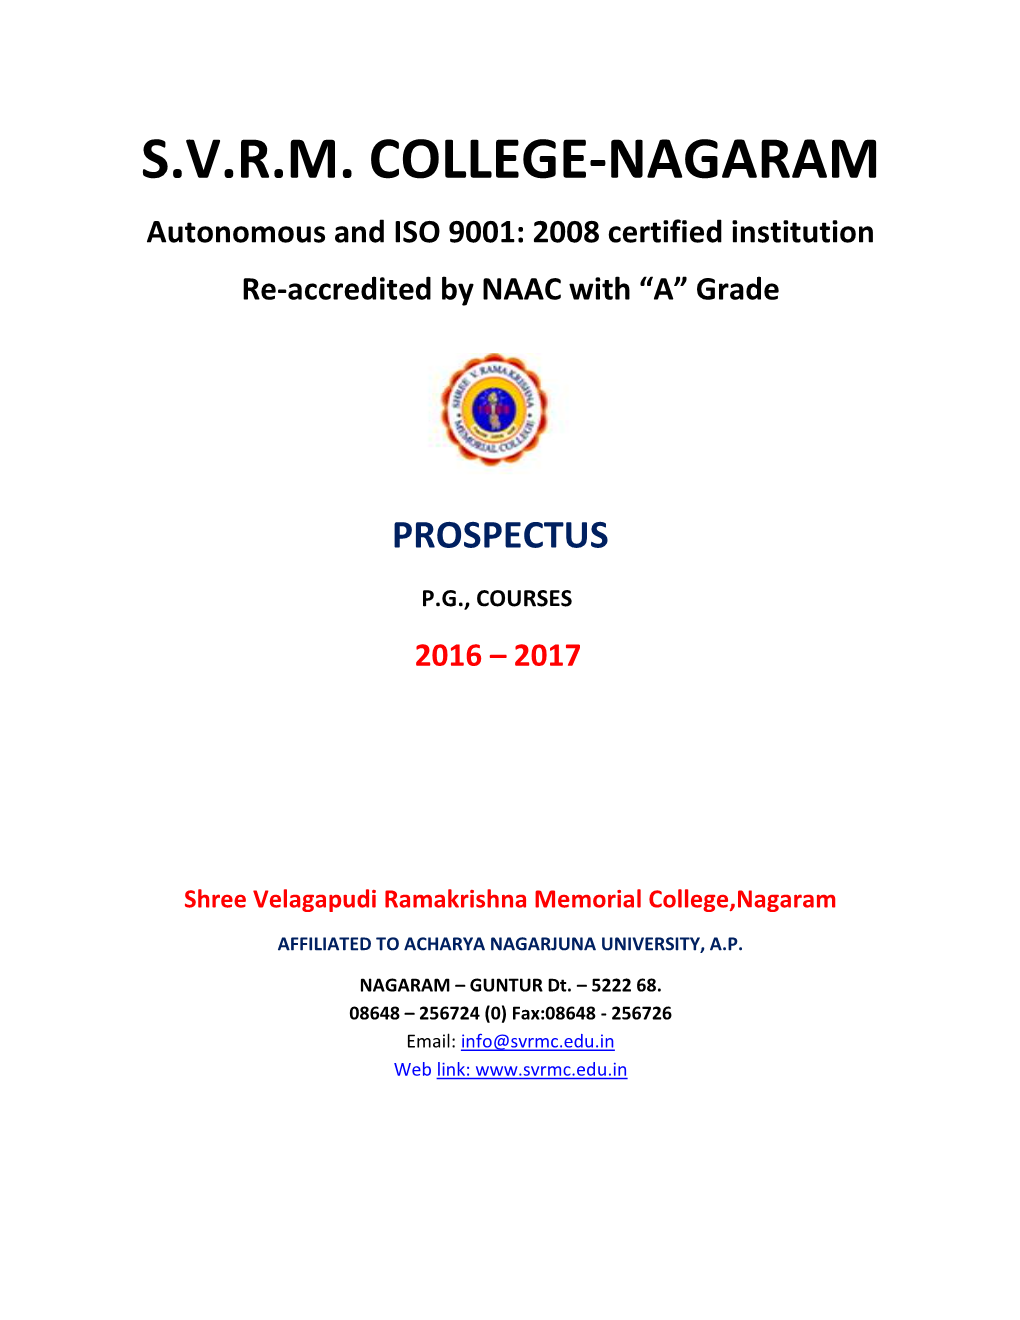 S.V.R.M. COLLEGE-NAGARAM Autonomous and ISO 9001: 2008 Certified Institution Re-Accredited by NAAC with “A” Grade